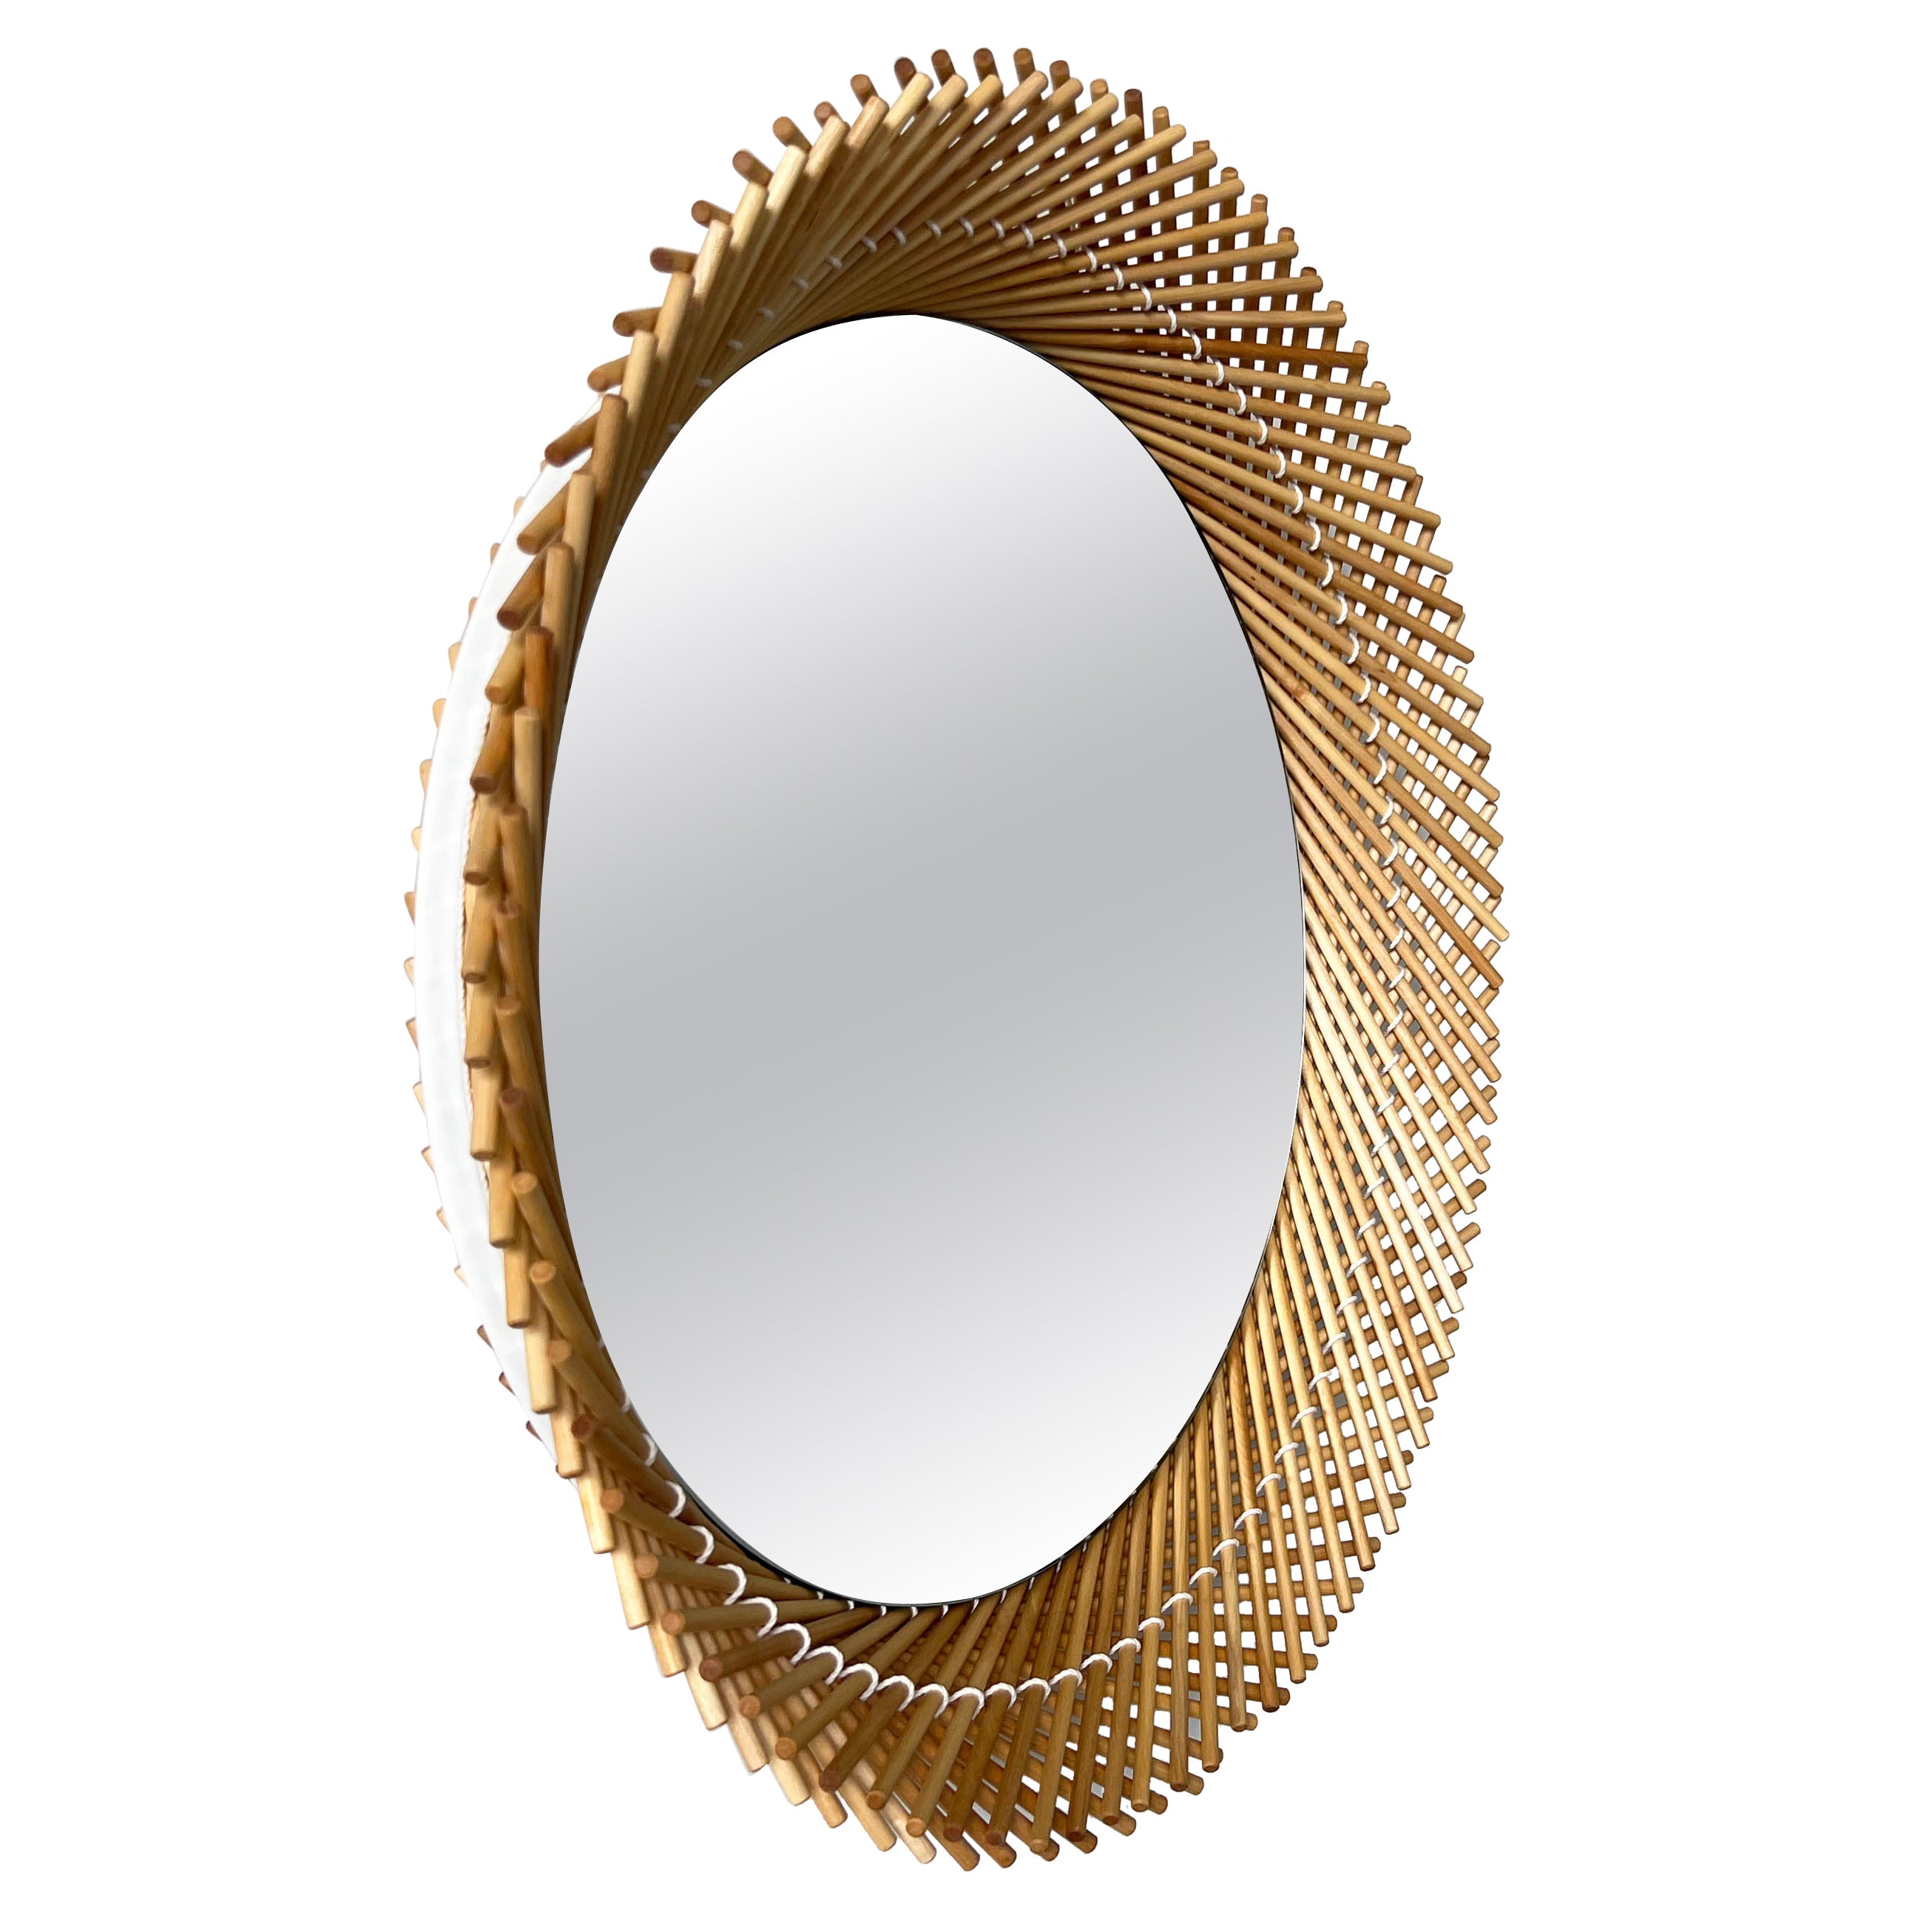 Mooda Mirror Round 18 / Natural Maple Wood, Clear Mirror by INDO-